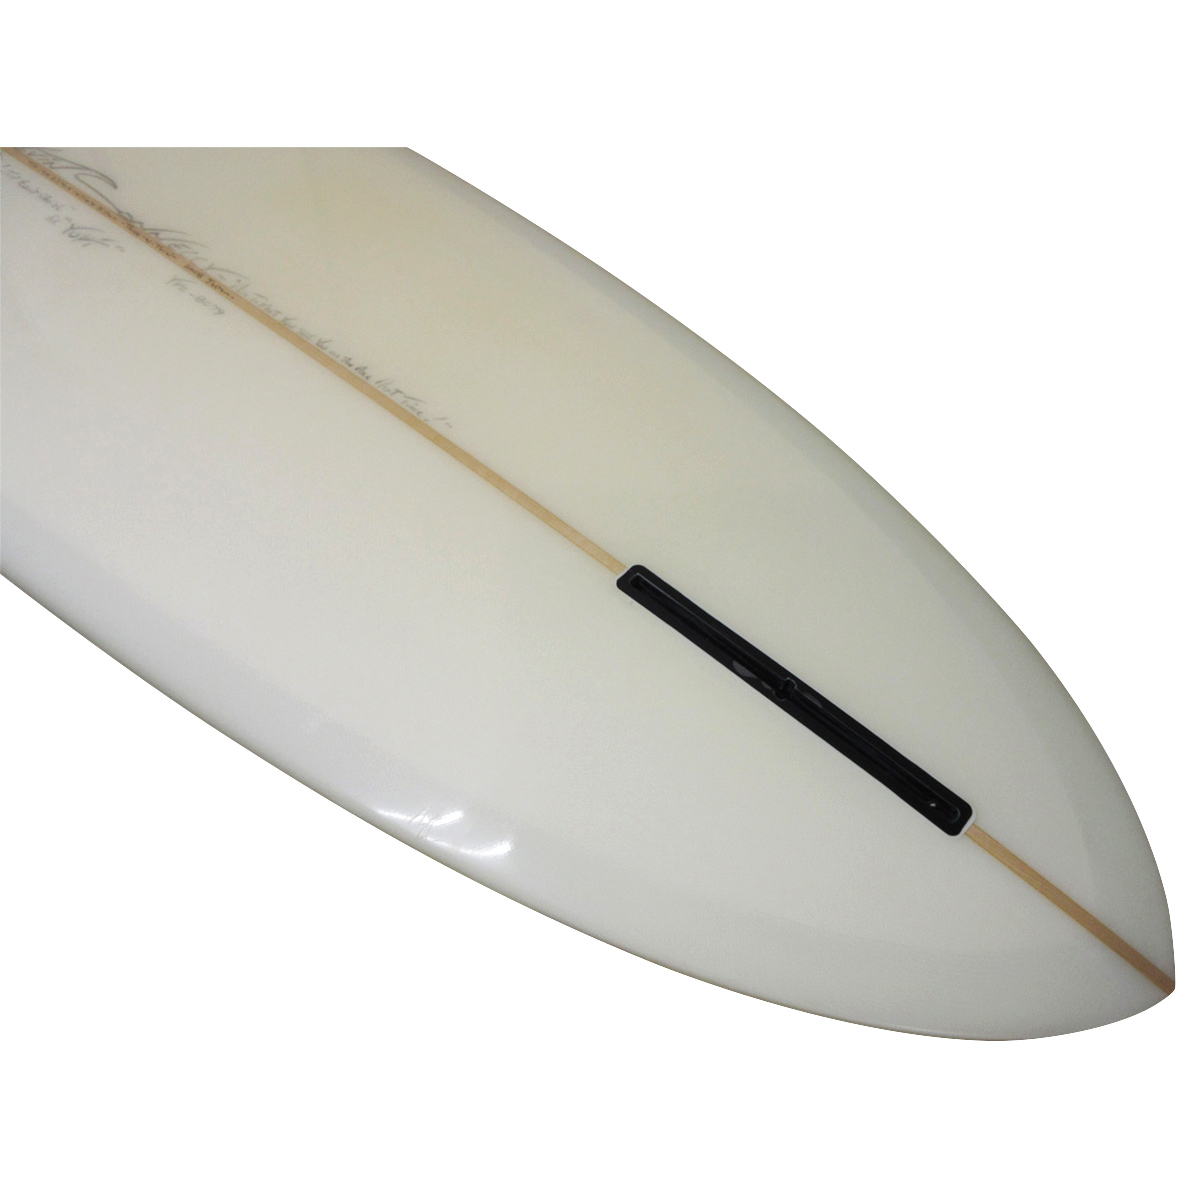 YU / Custom Pintail Nose Rider 9`3 Shaped by Kevin Connelly